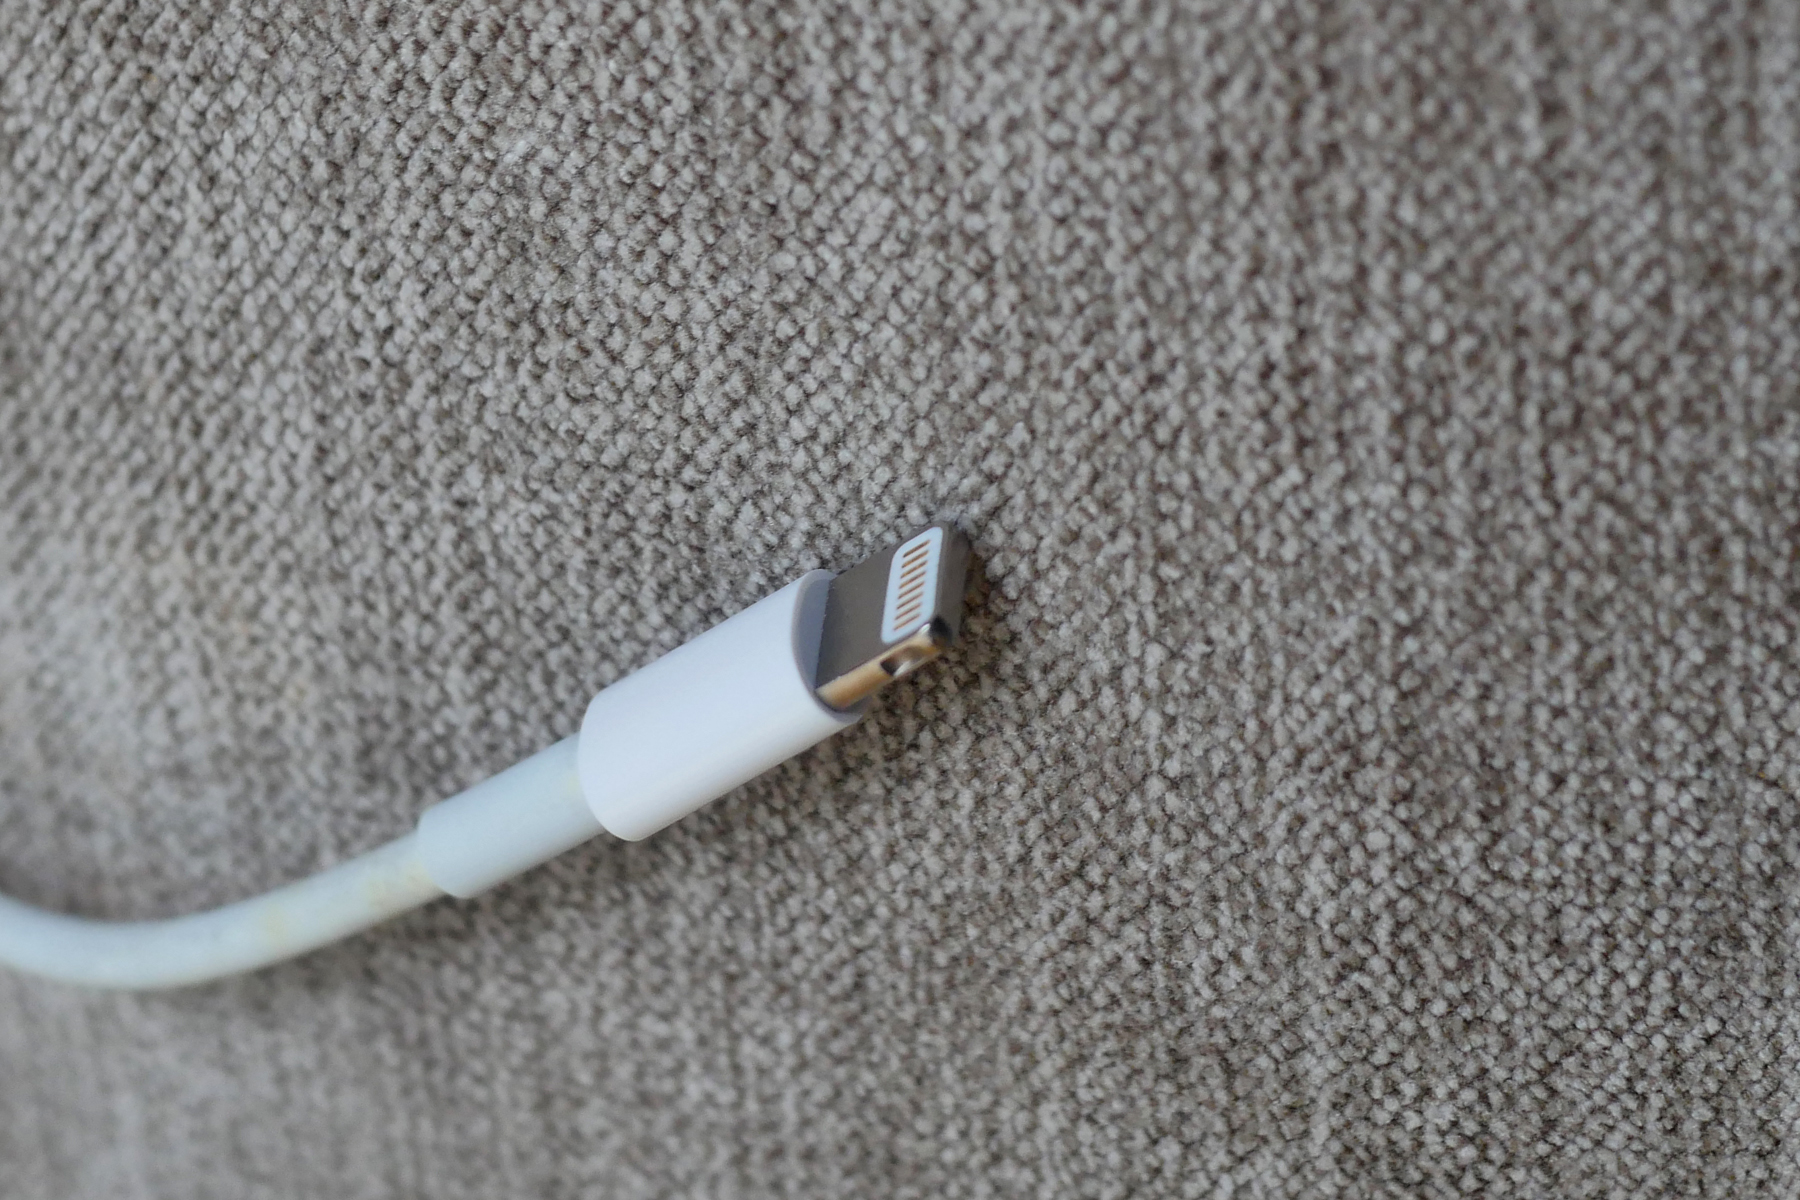 Lightning cables are easily identifiable from the miniature metal plates visible on both sides of the connector.